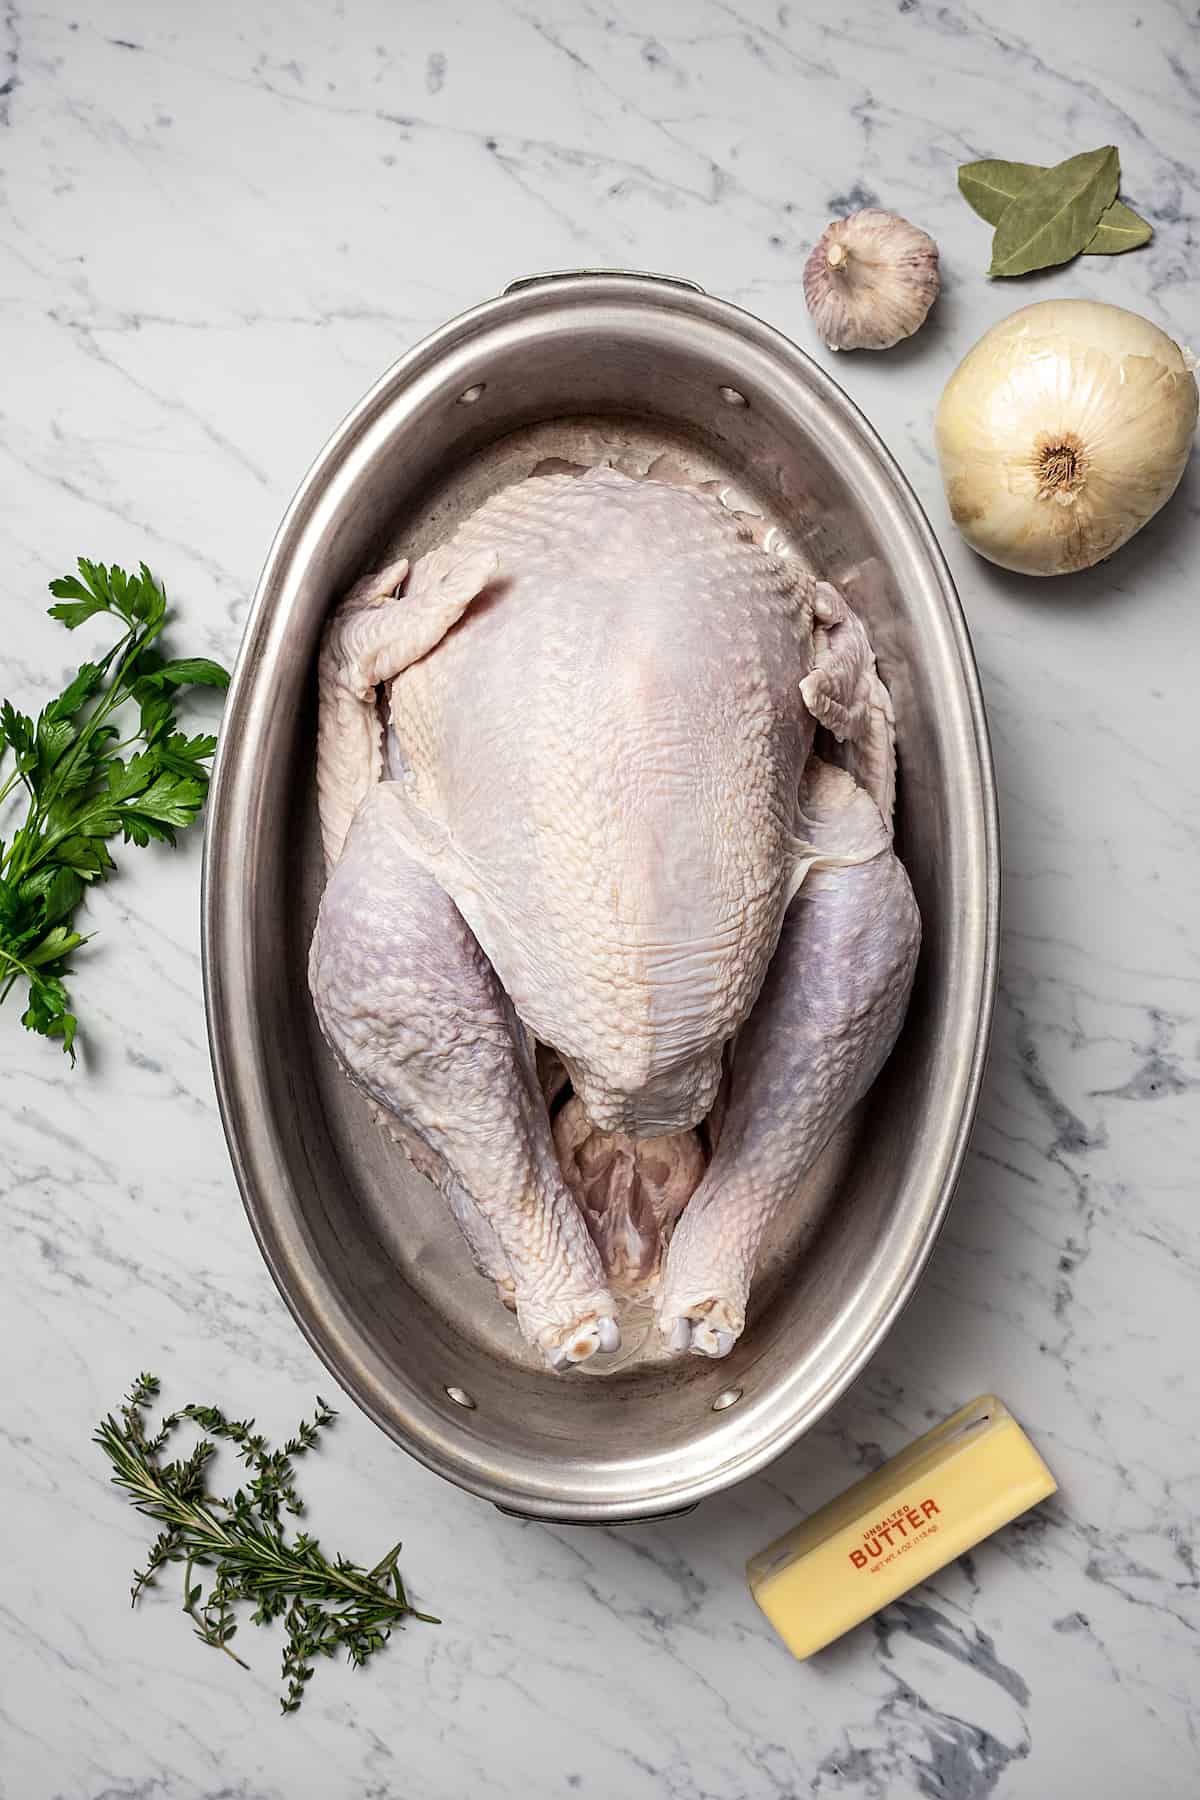 A whole turkey in a roasting pan. Fresh herbs, garlic, and butter are on the work surface.